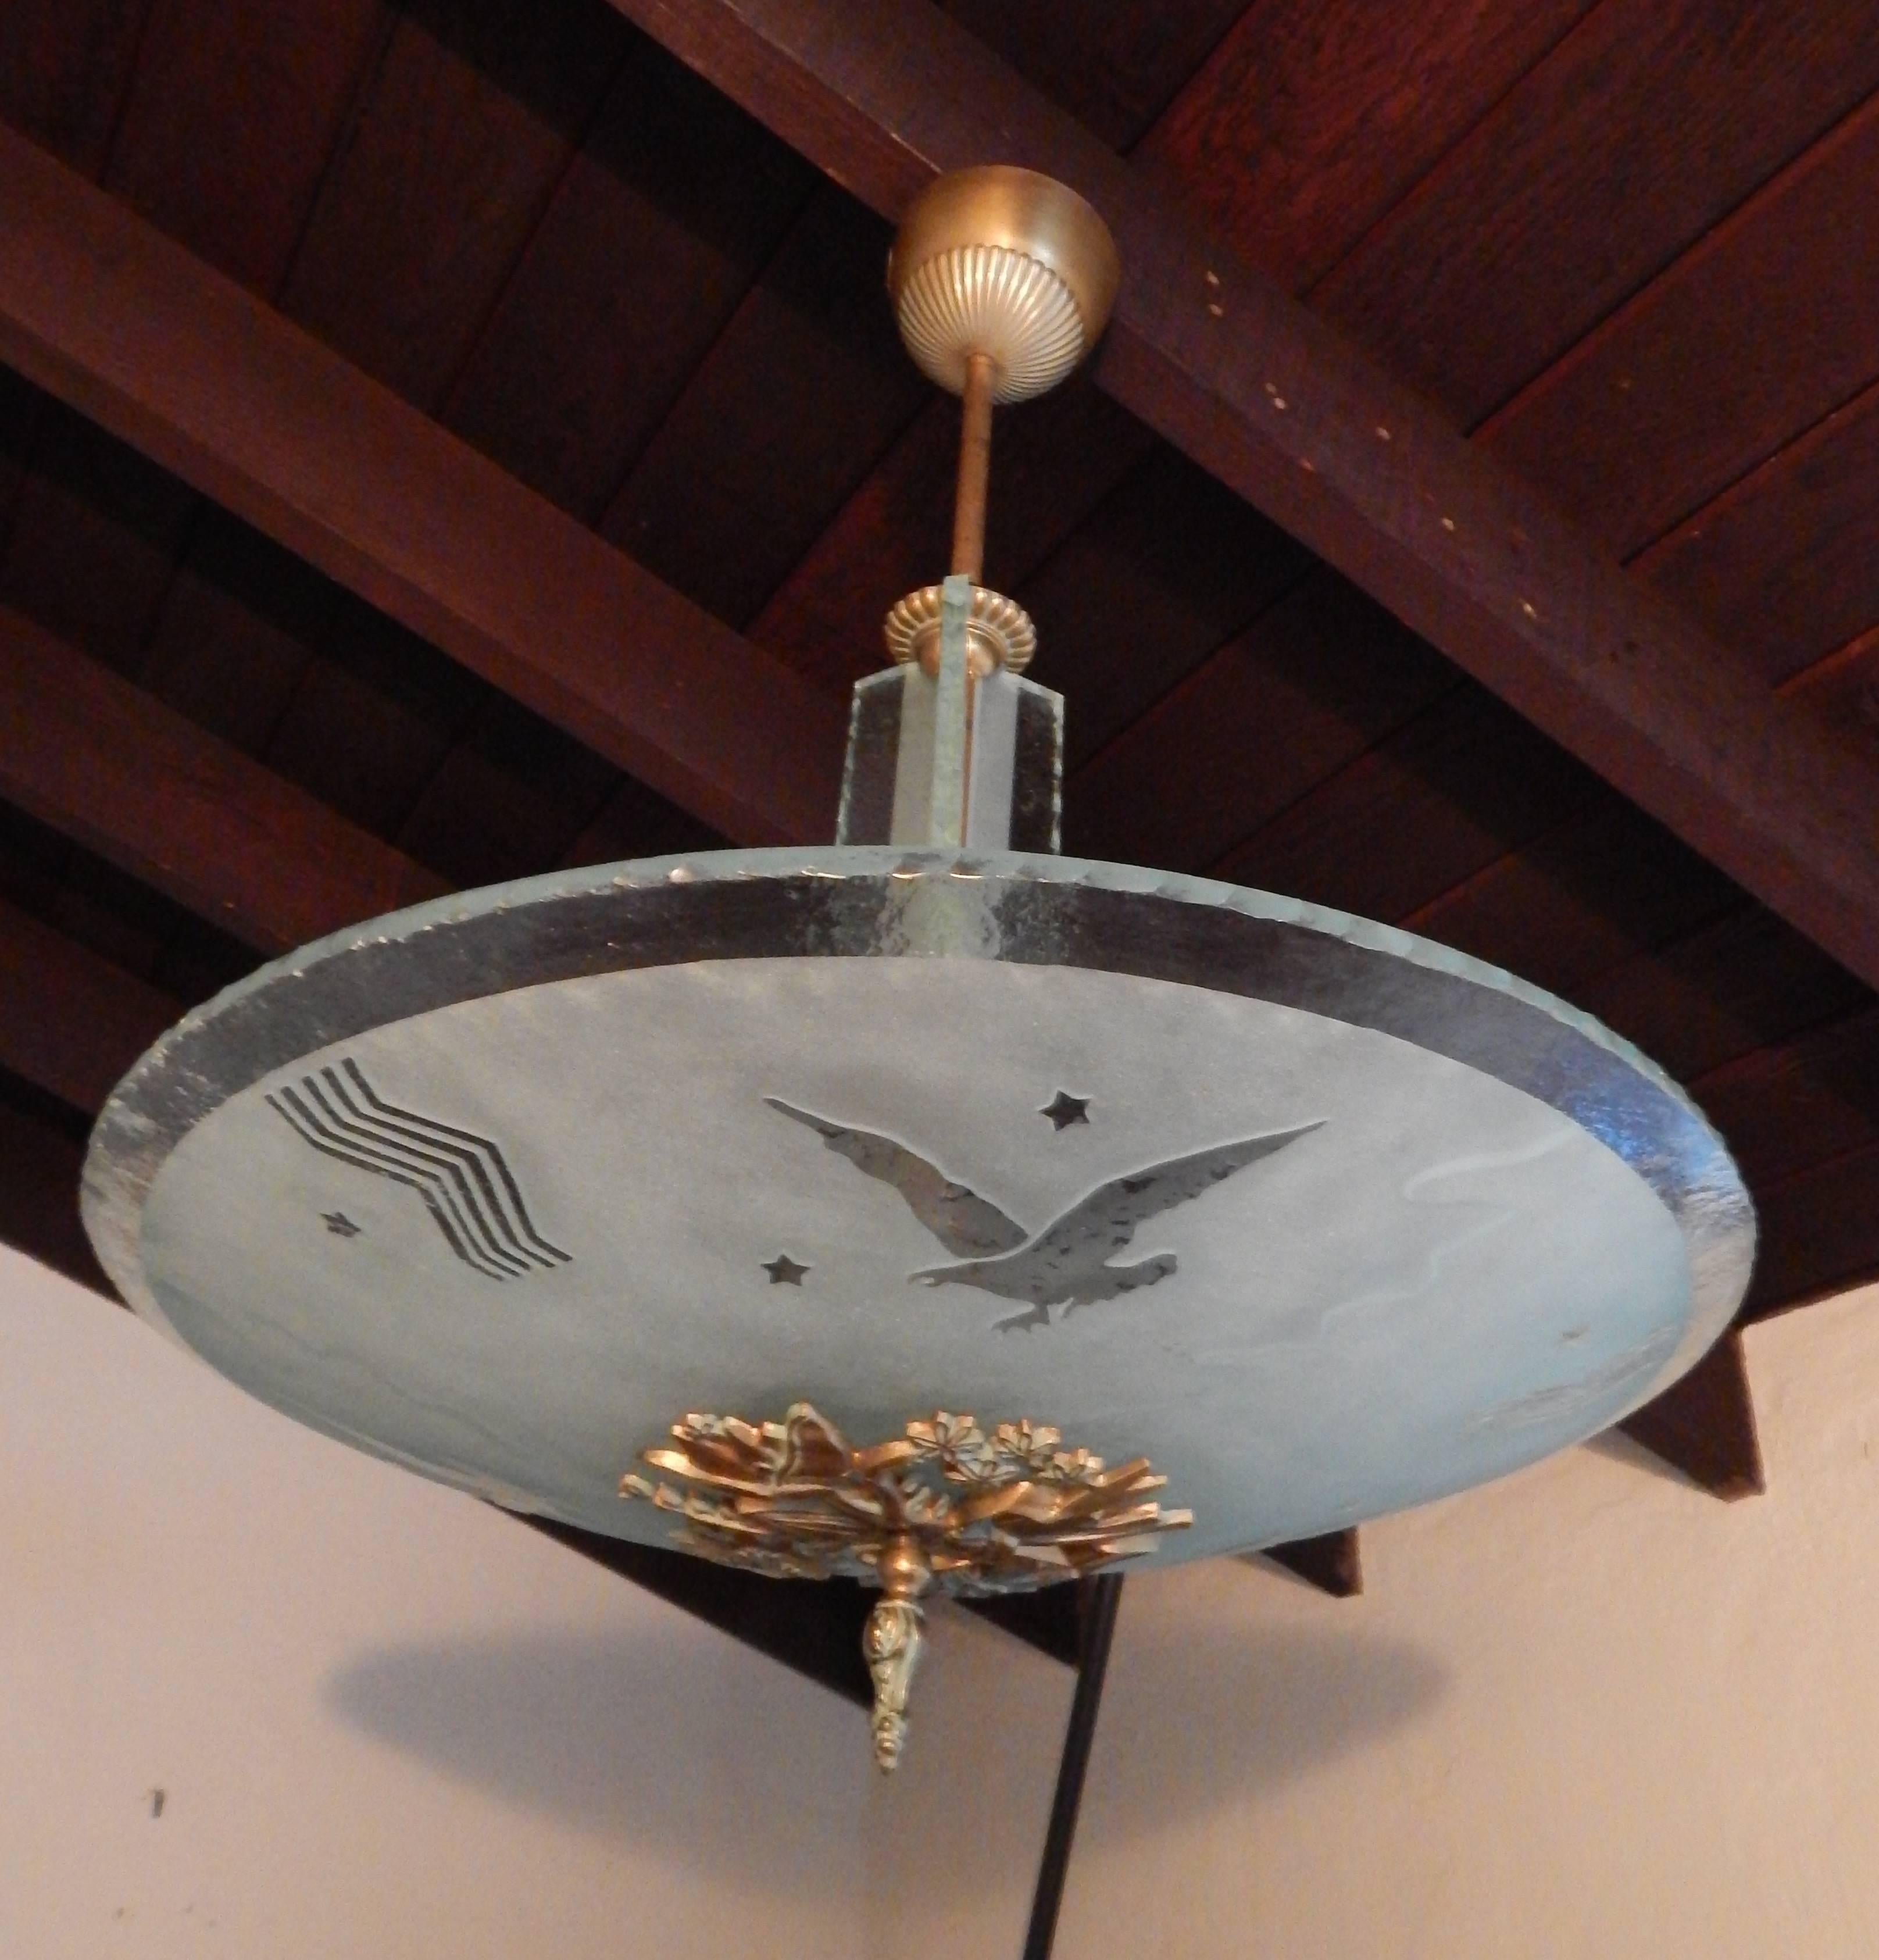 Swedish Art Deco acid etched glass hanging fixture. There are eagles and clouds etched into the bowl. Glass ends are all hammered. The art glass continues up the stem of the fixture. All metal work is bronze. In excellent antique condition and